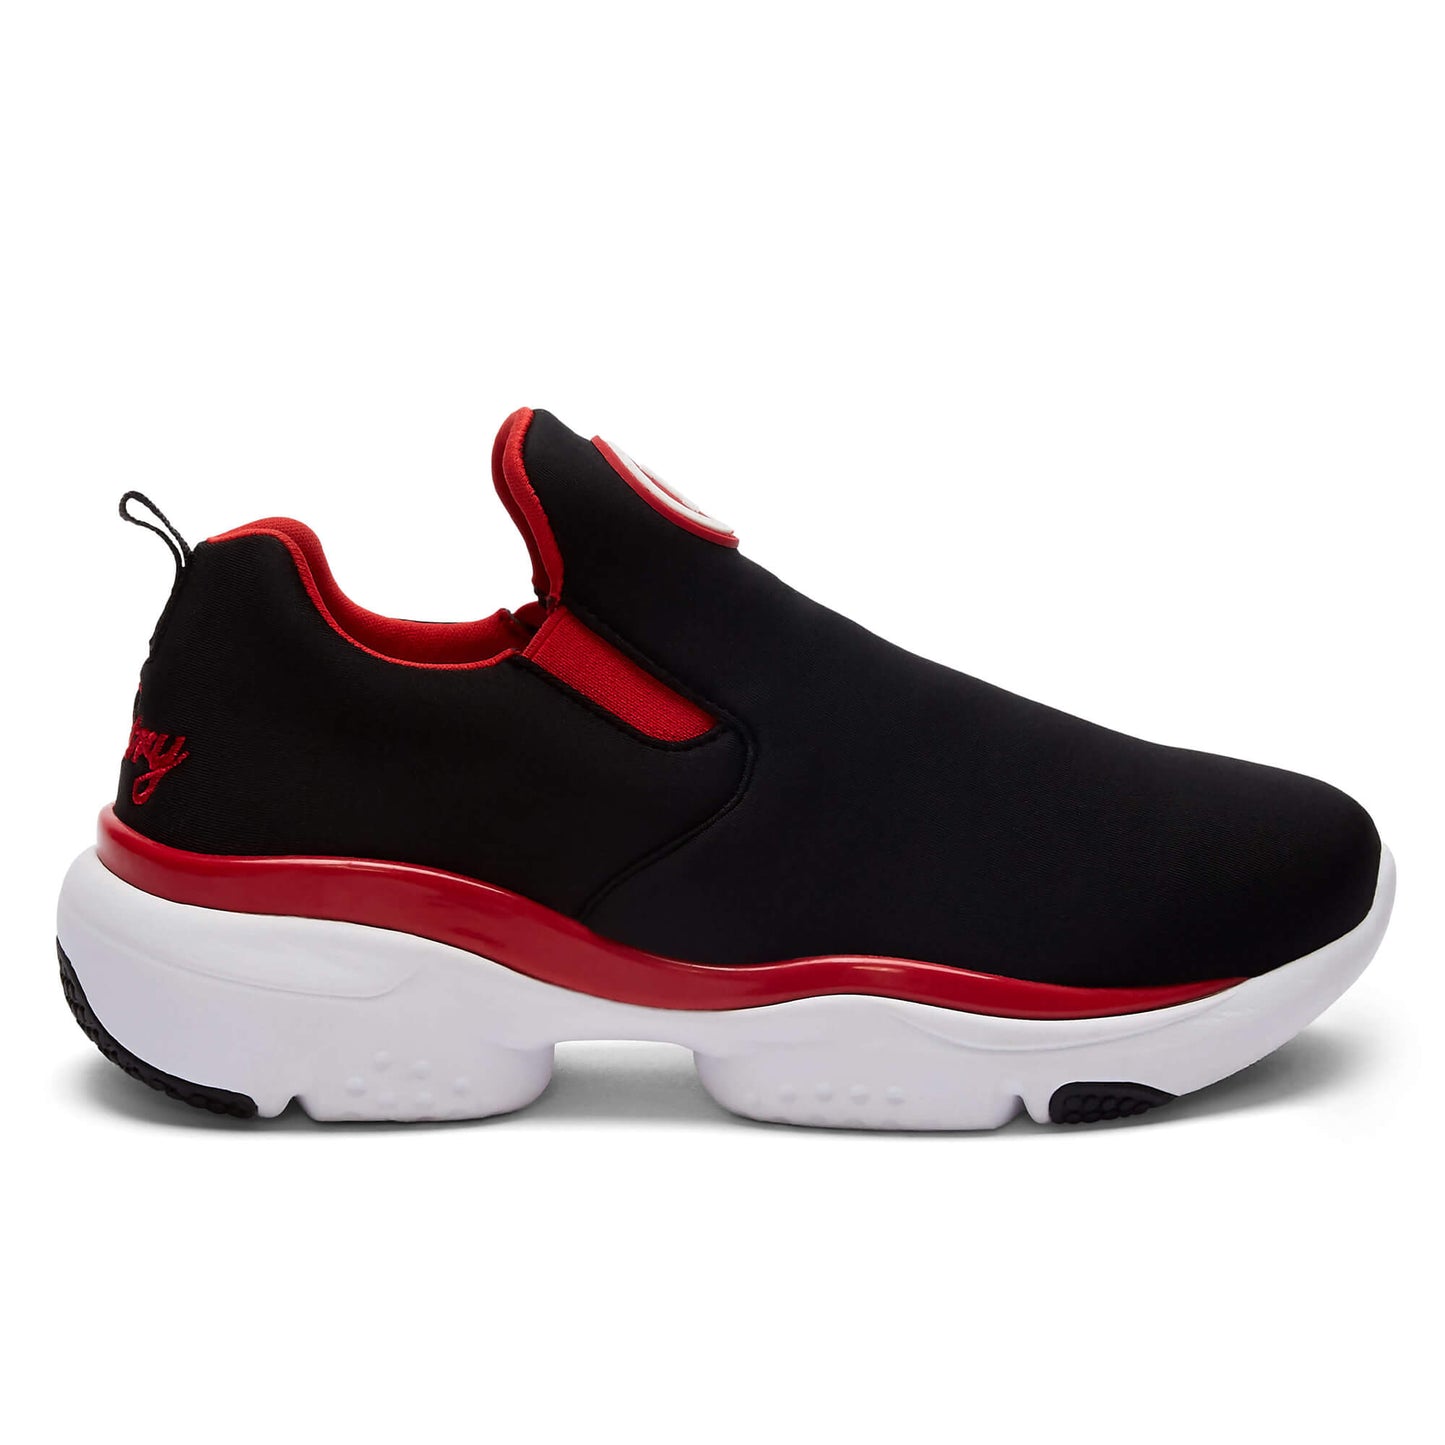 Pastry Phoenix Adult Womens Sneaker in Black/Red lateral view